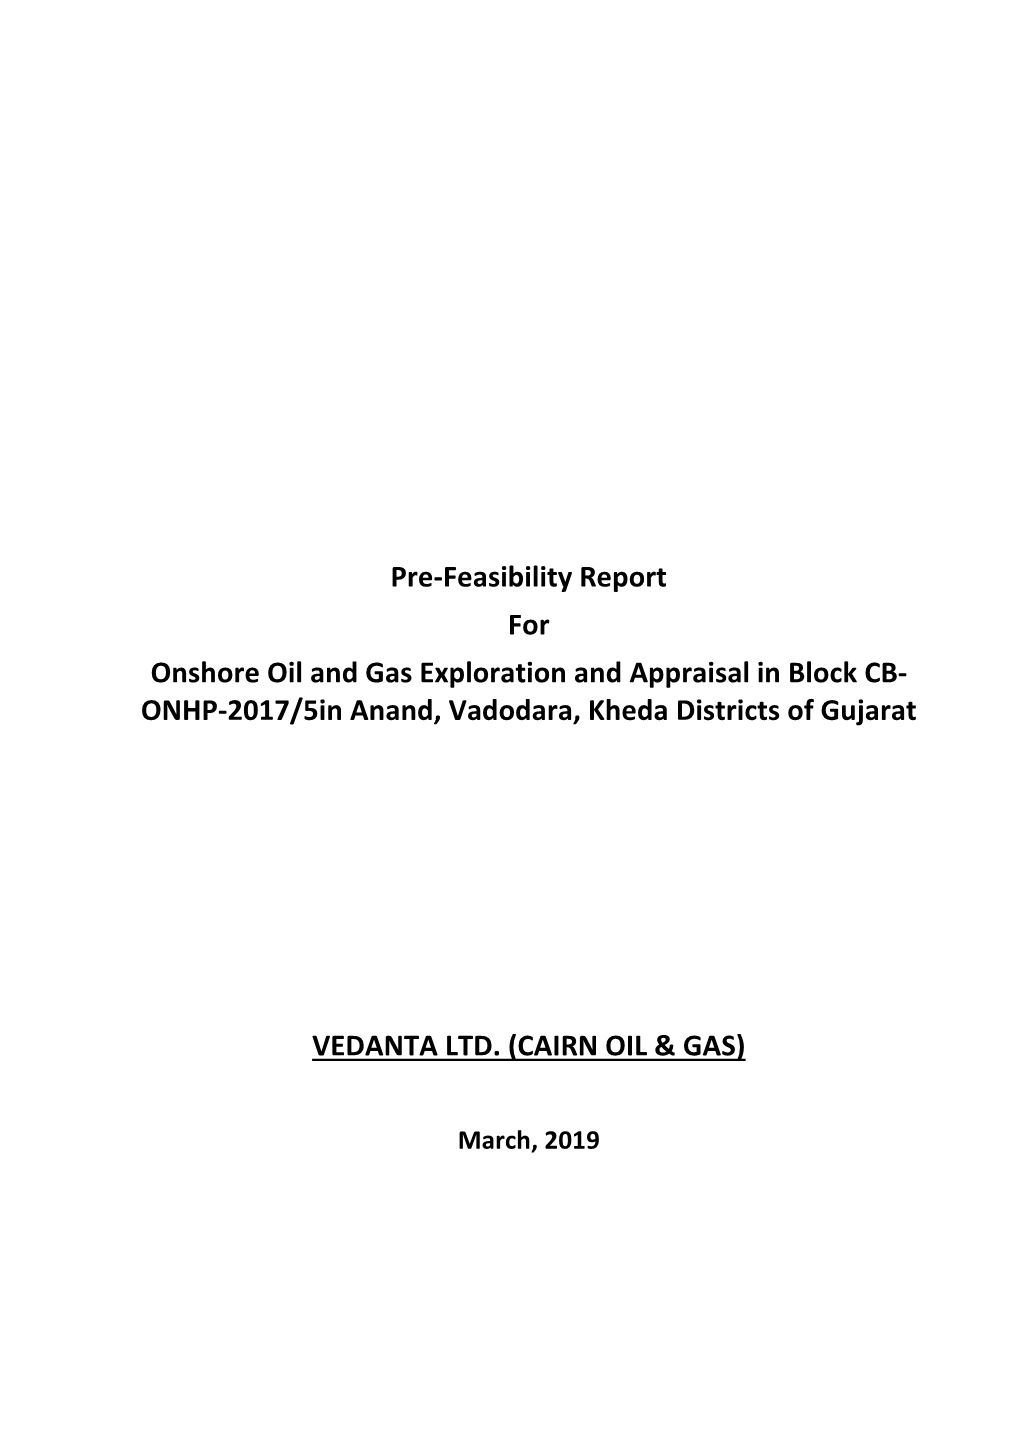 Pre-Feasibility Report for Onshore Oil and Gas Exploration and Appraisal in Block CB- ONHP-2017/5In Anand, Vadodara, Kheda Districts of Gujarat